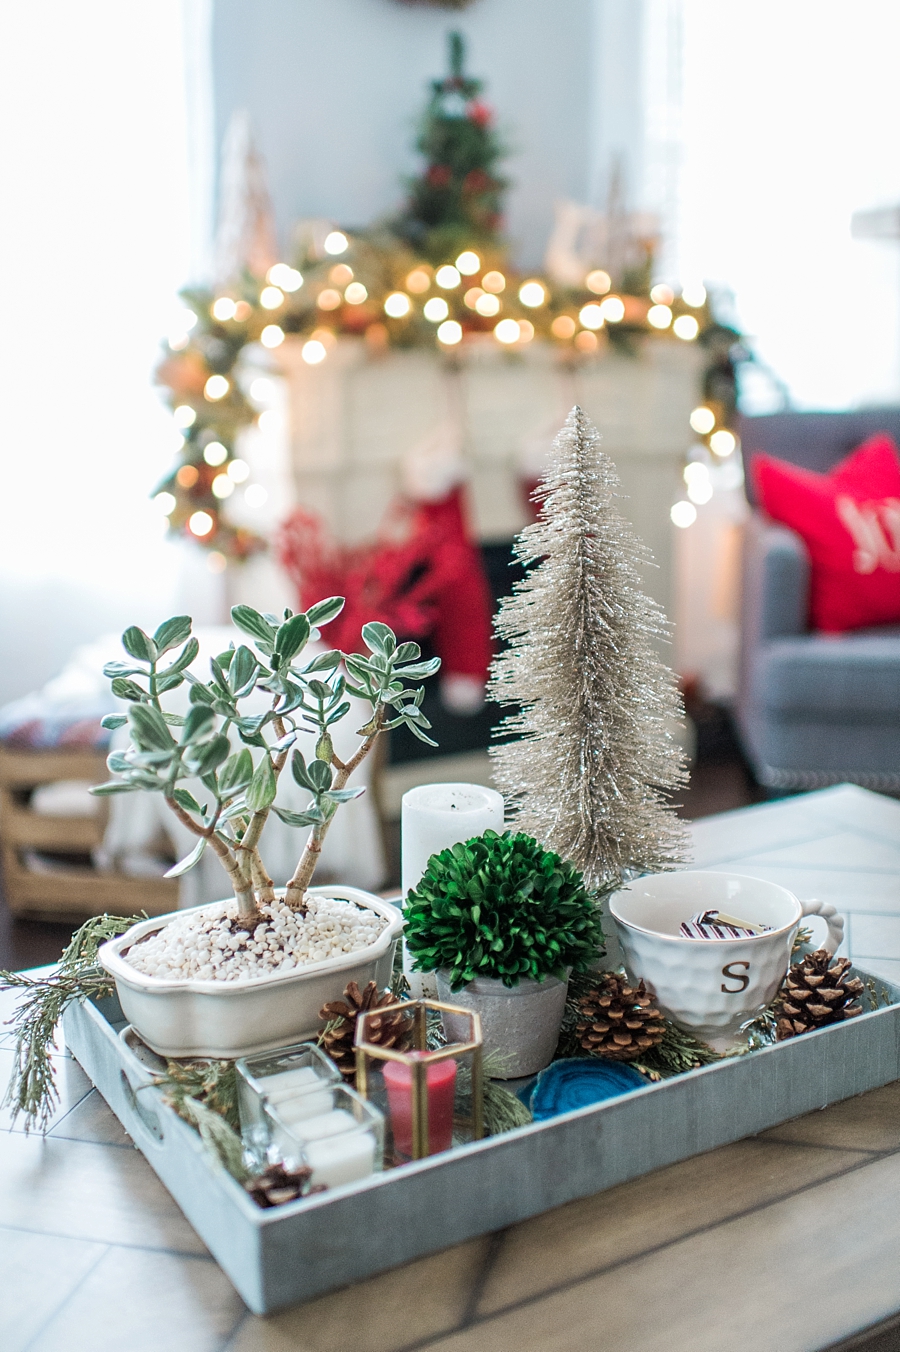 Christmas Decor Ideas for a Townhouse | Living Room, Dining Room and Kitchen